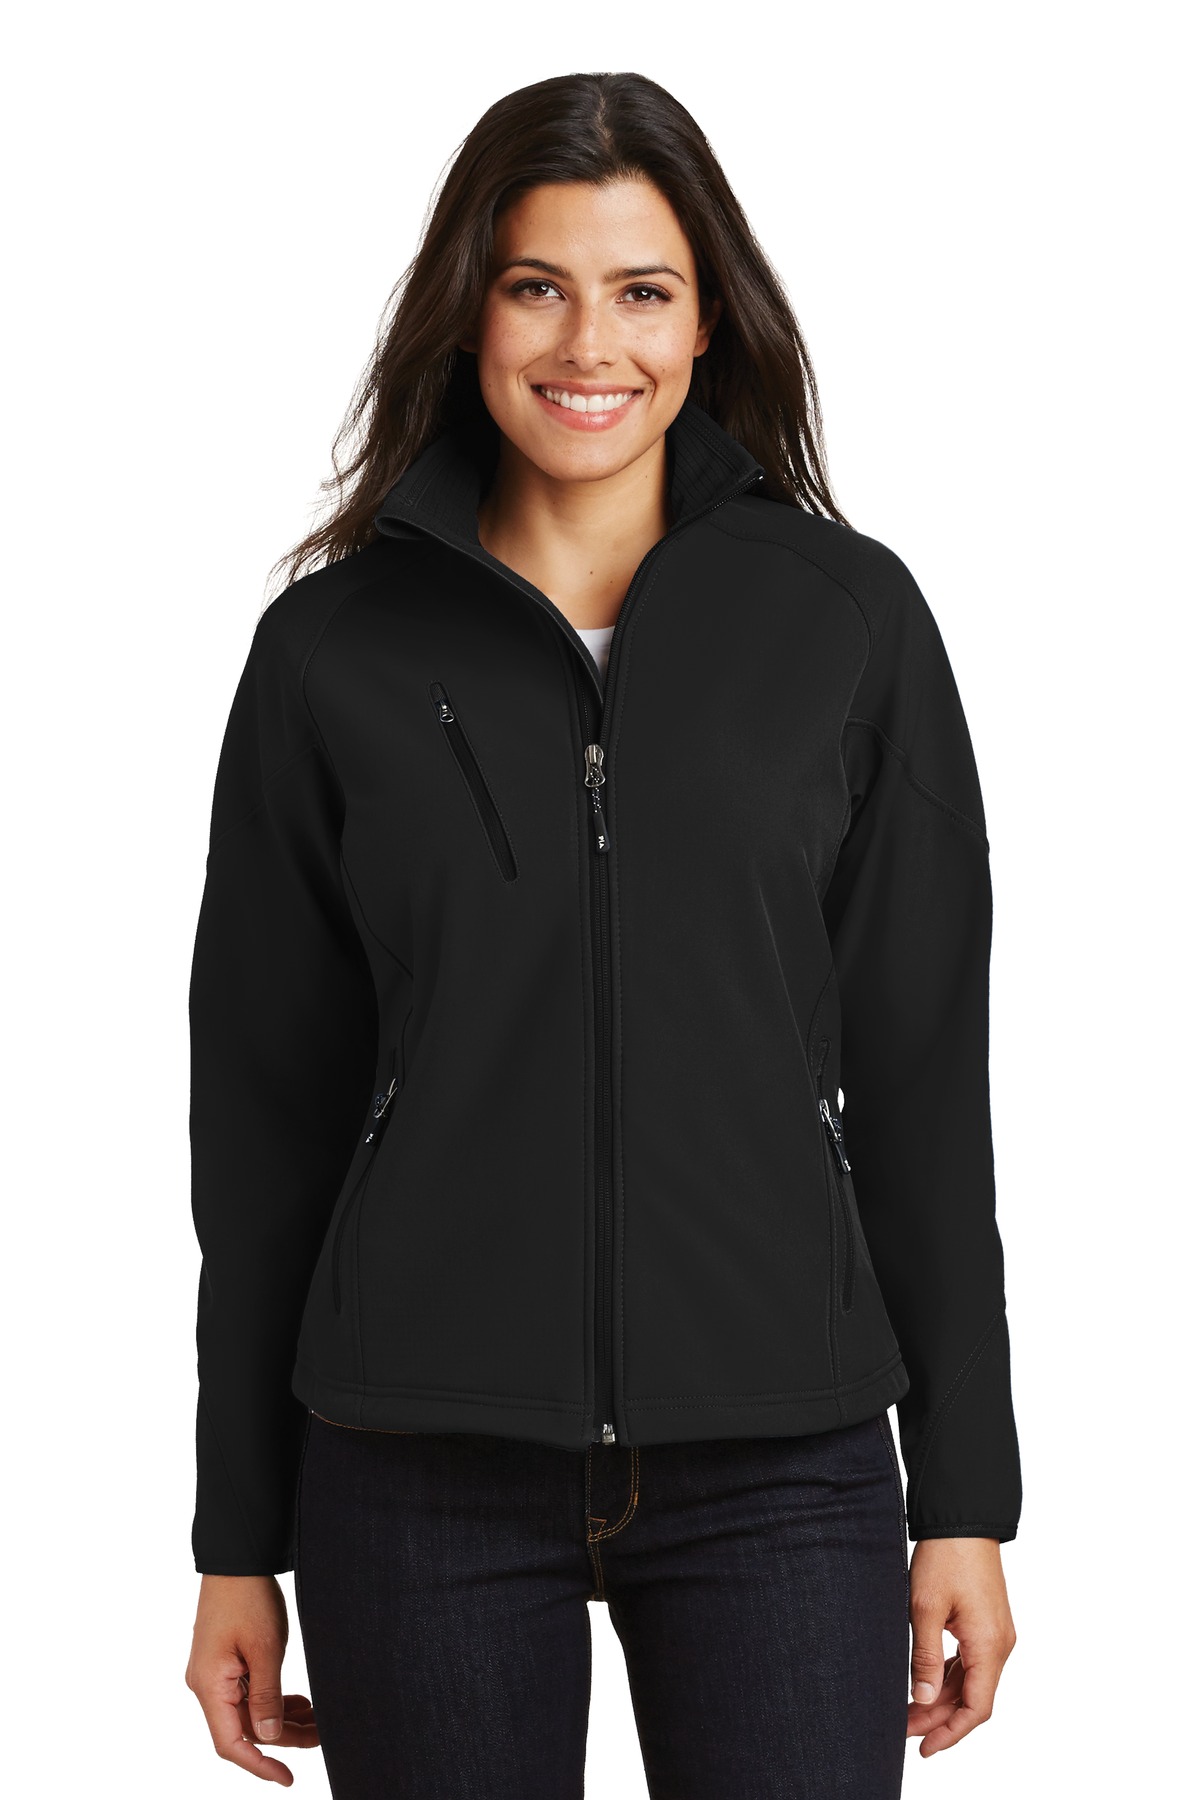 Port Authority Ladies Textured Soft Shell Jacket-